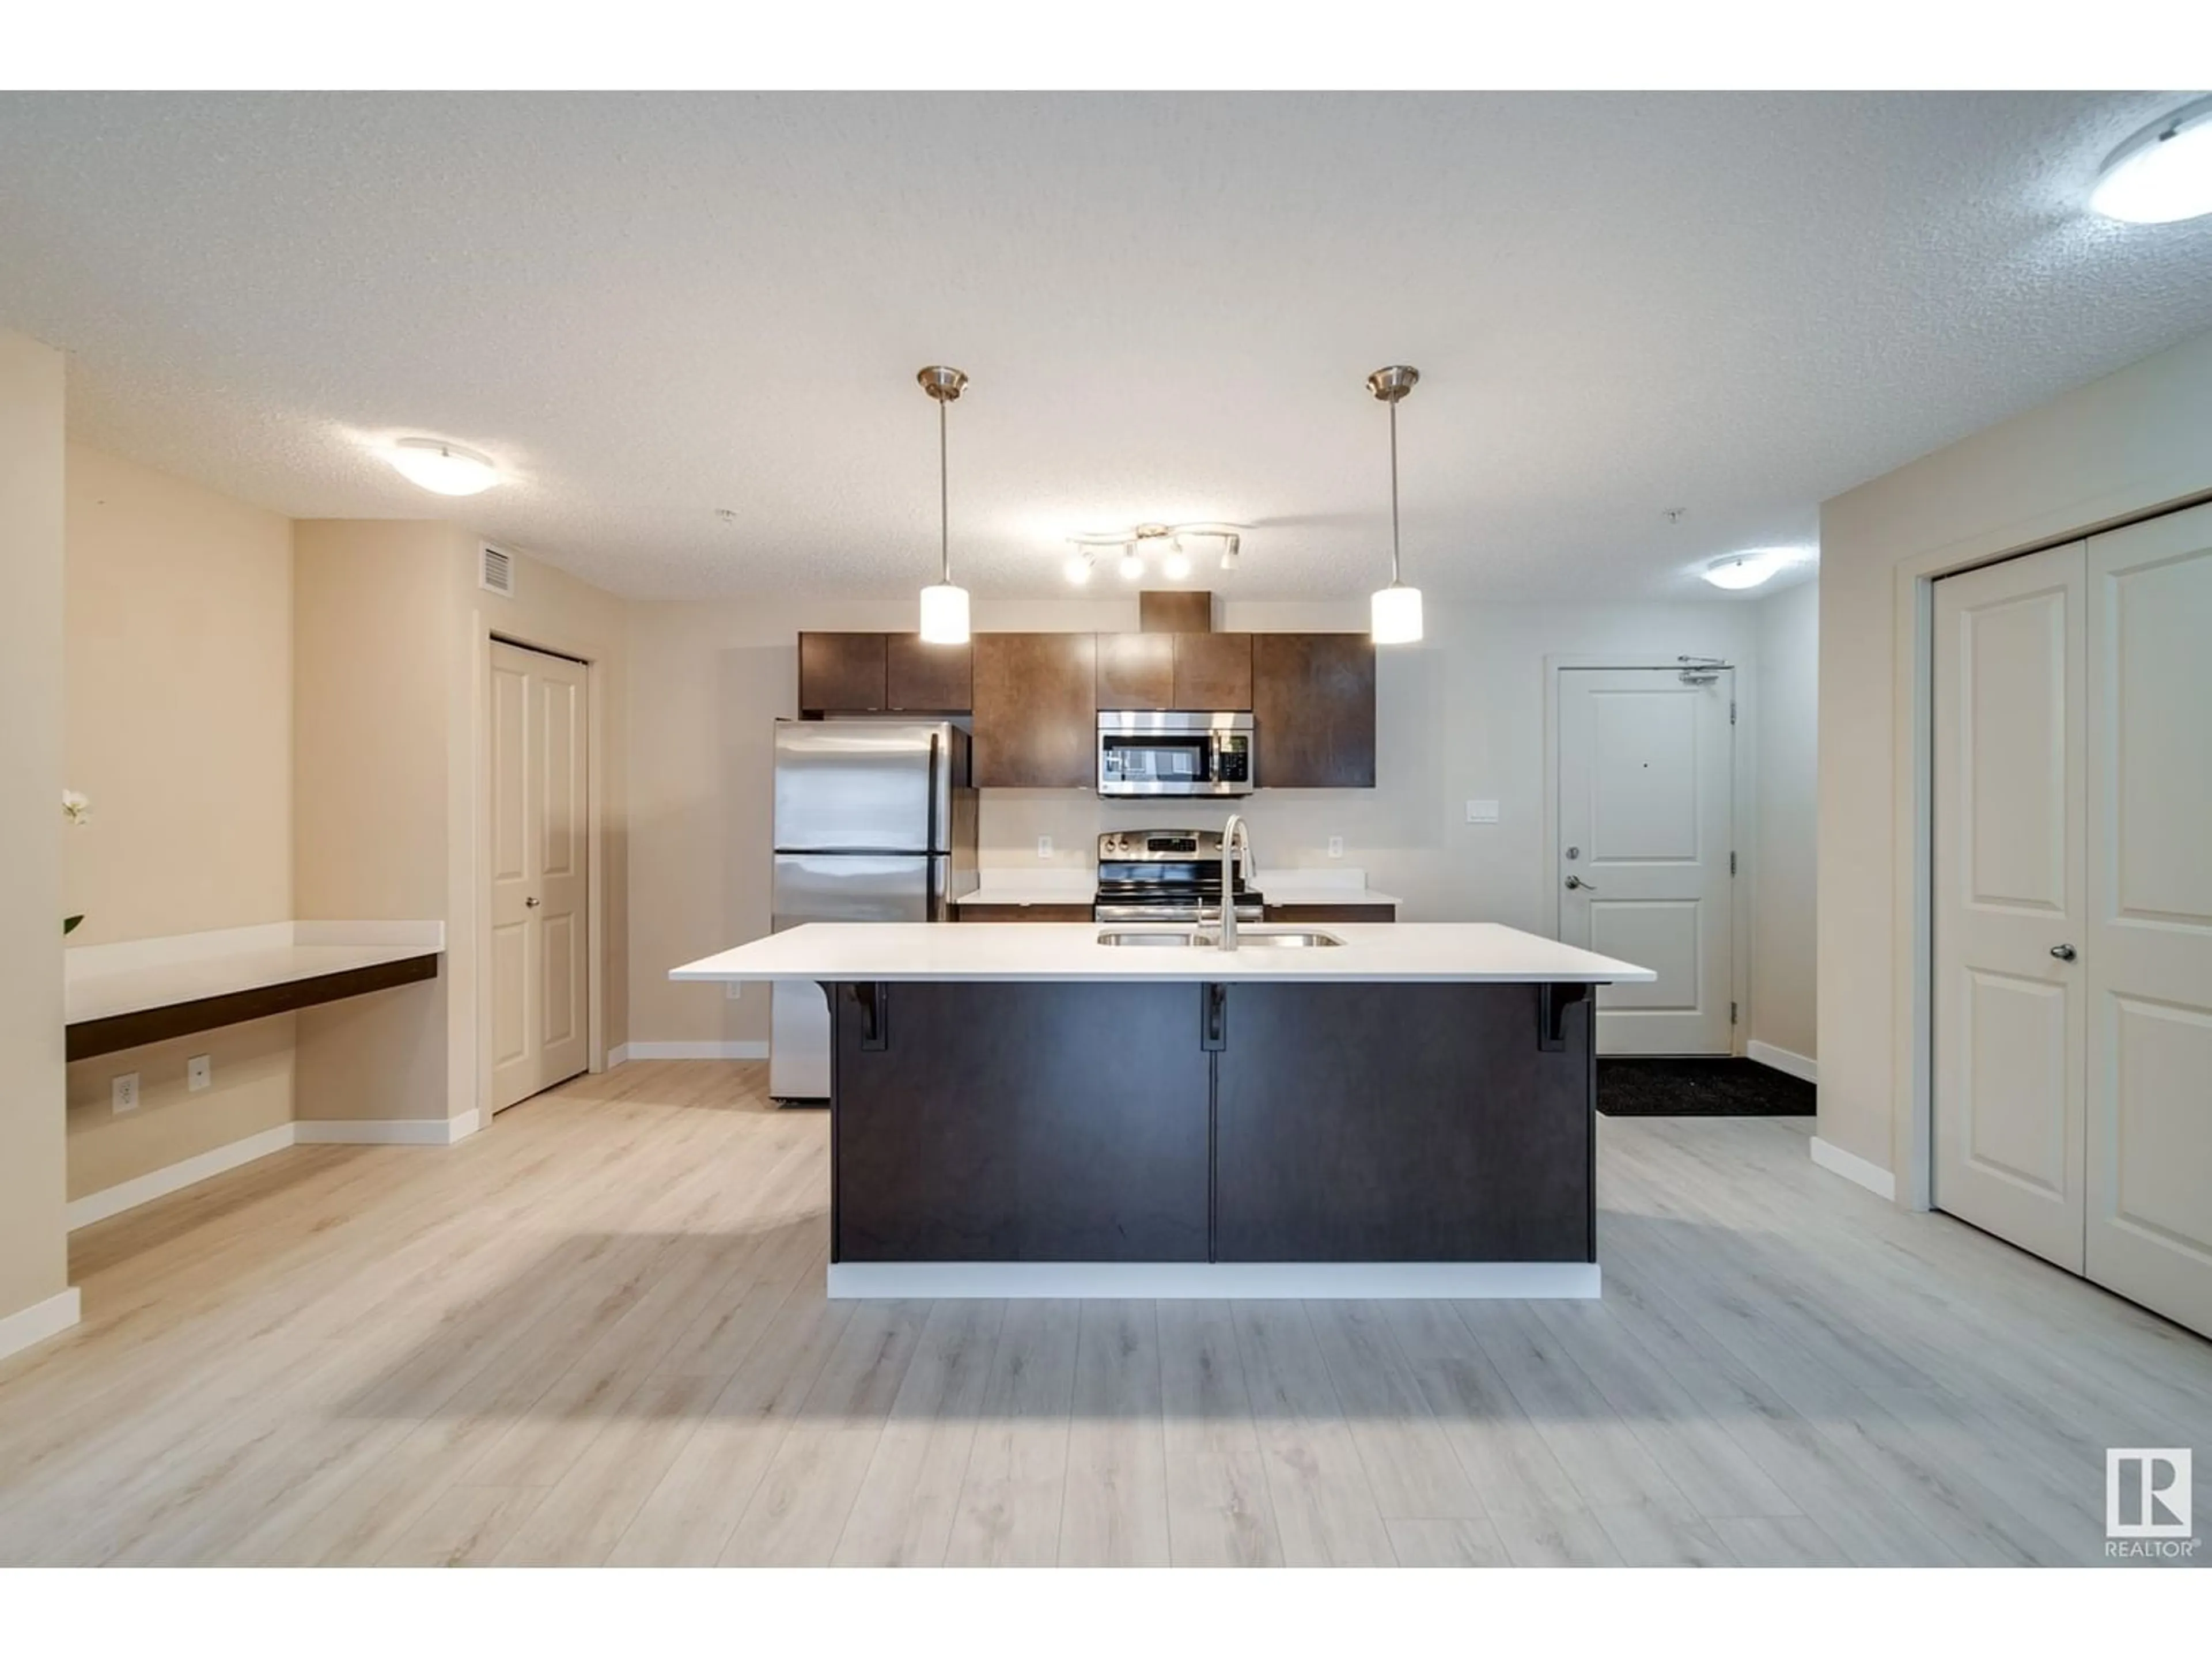 Contemporary kitchen for #110 508 ALBANY WY NW, Edmonton Alberta T6V0L1